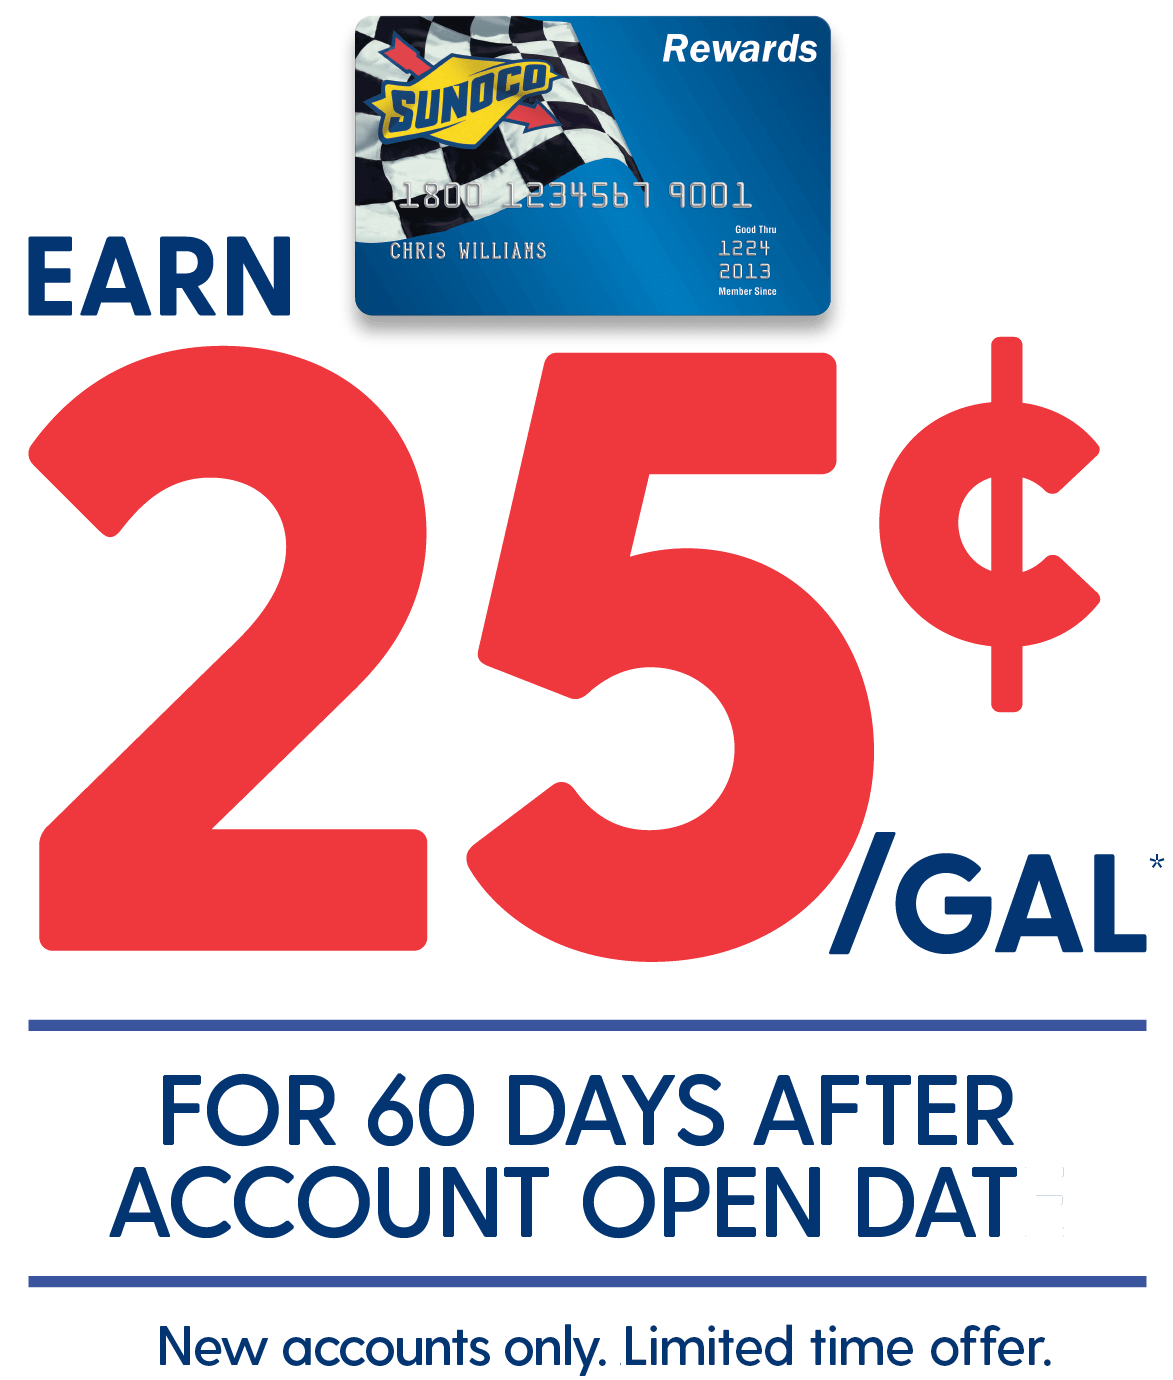 Earn 25 cents off per gallon for 60 days after account open date